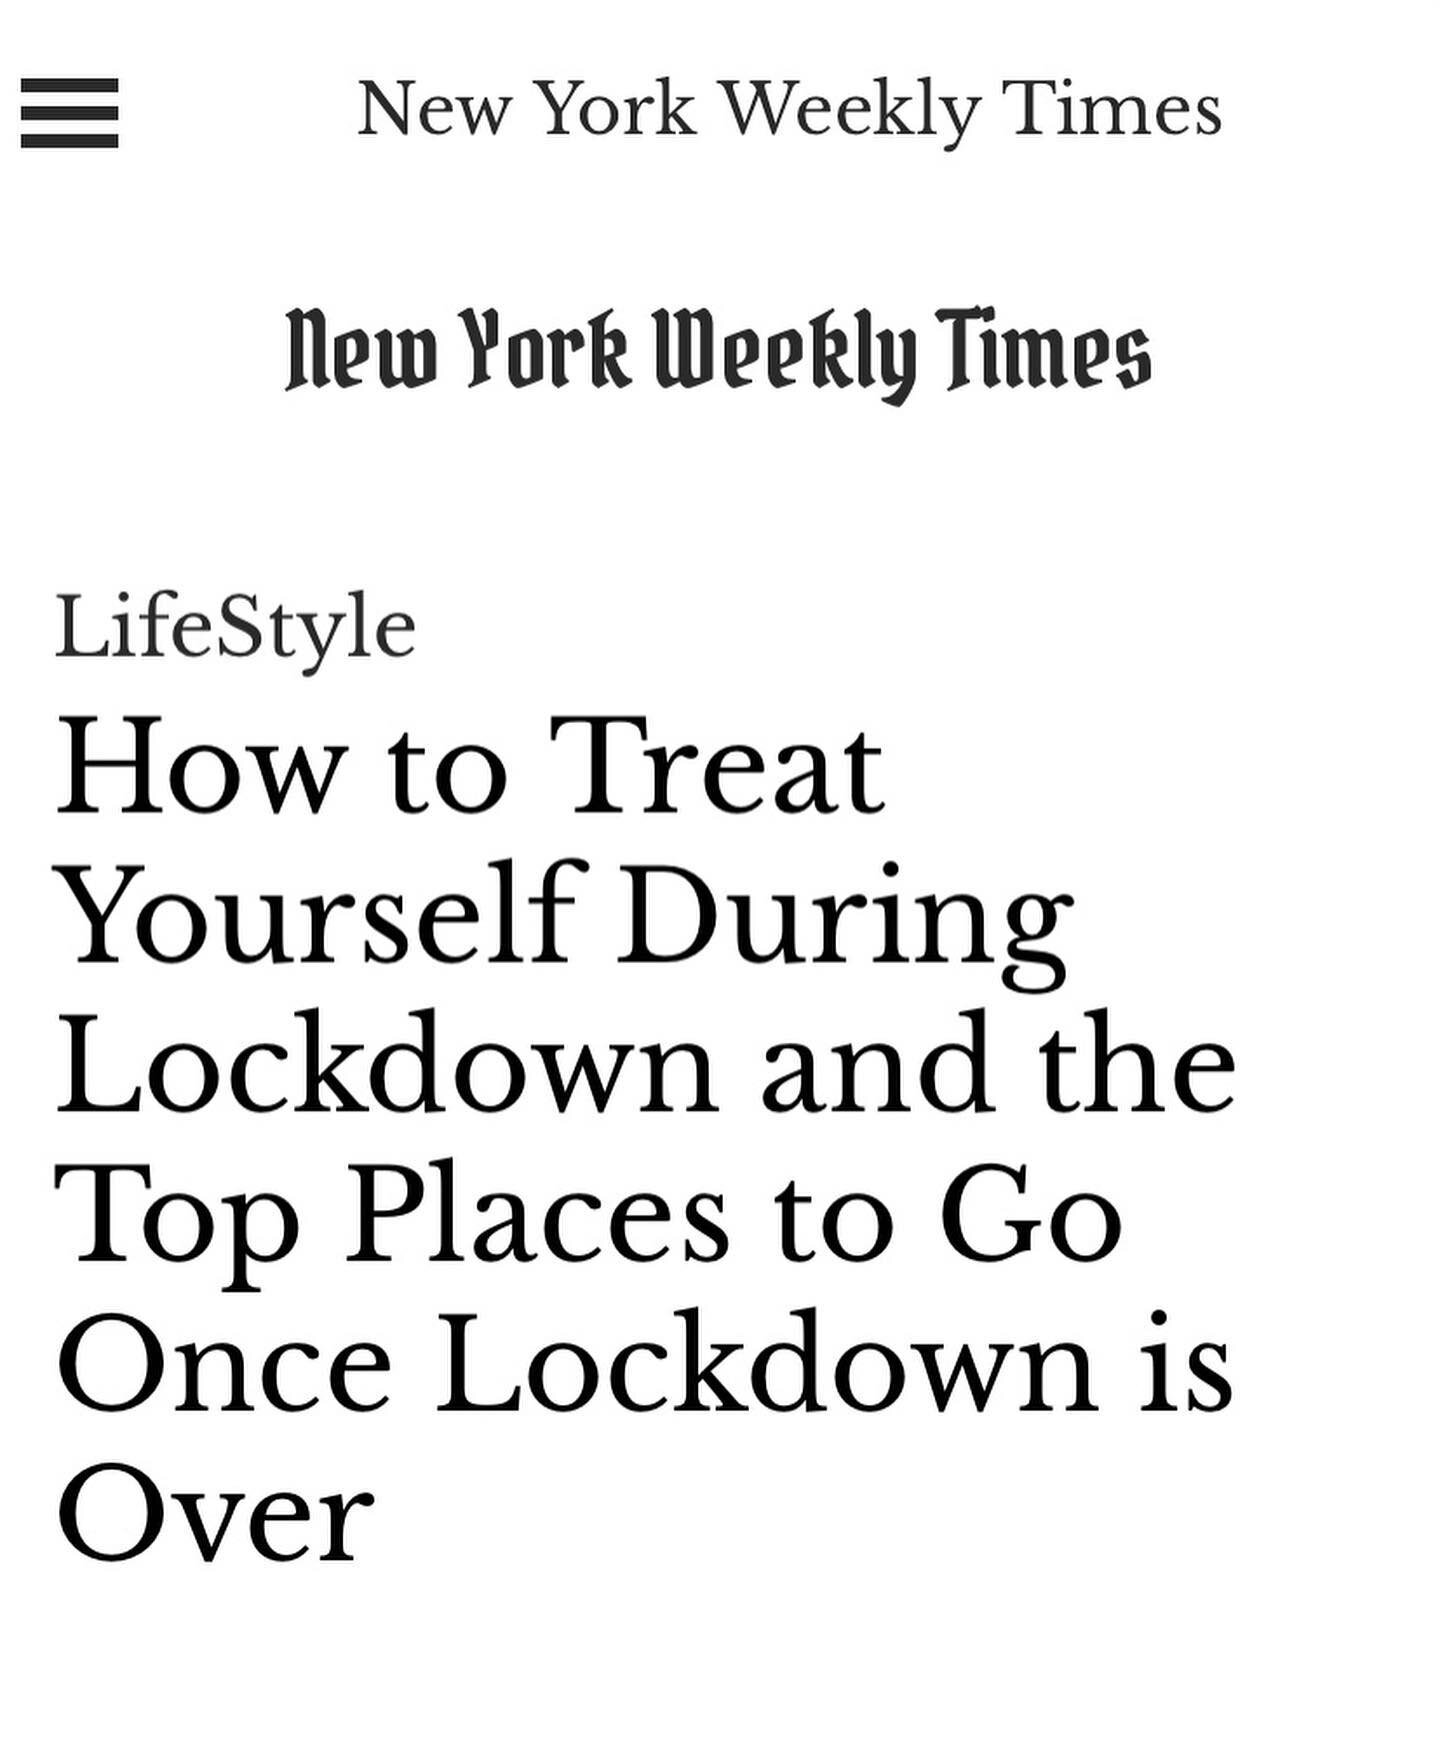 Proud to see our spa highlighted in the New York Weekly Times for places to visit in Canada once the lockdown is over. Self care is a must, especially during these difficult times. We hope you are all staying safe and we look forward to pampering you